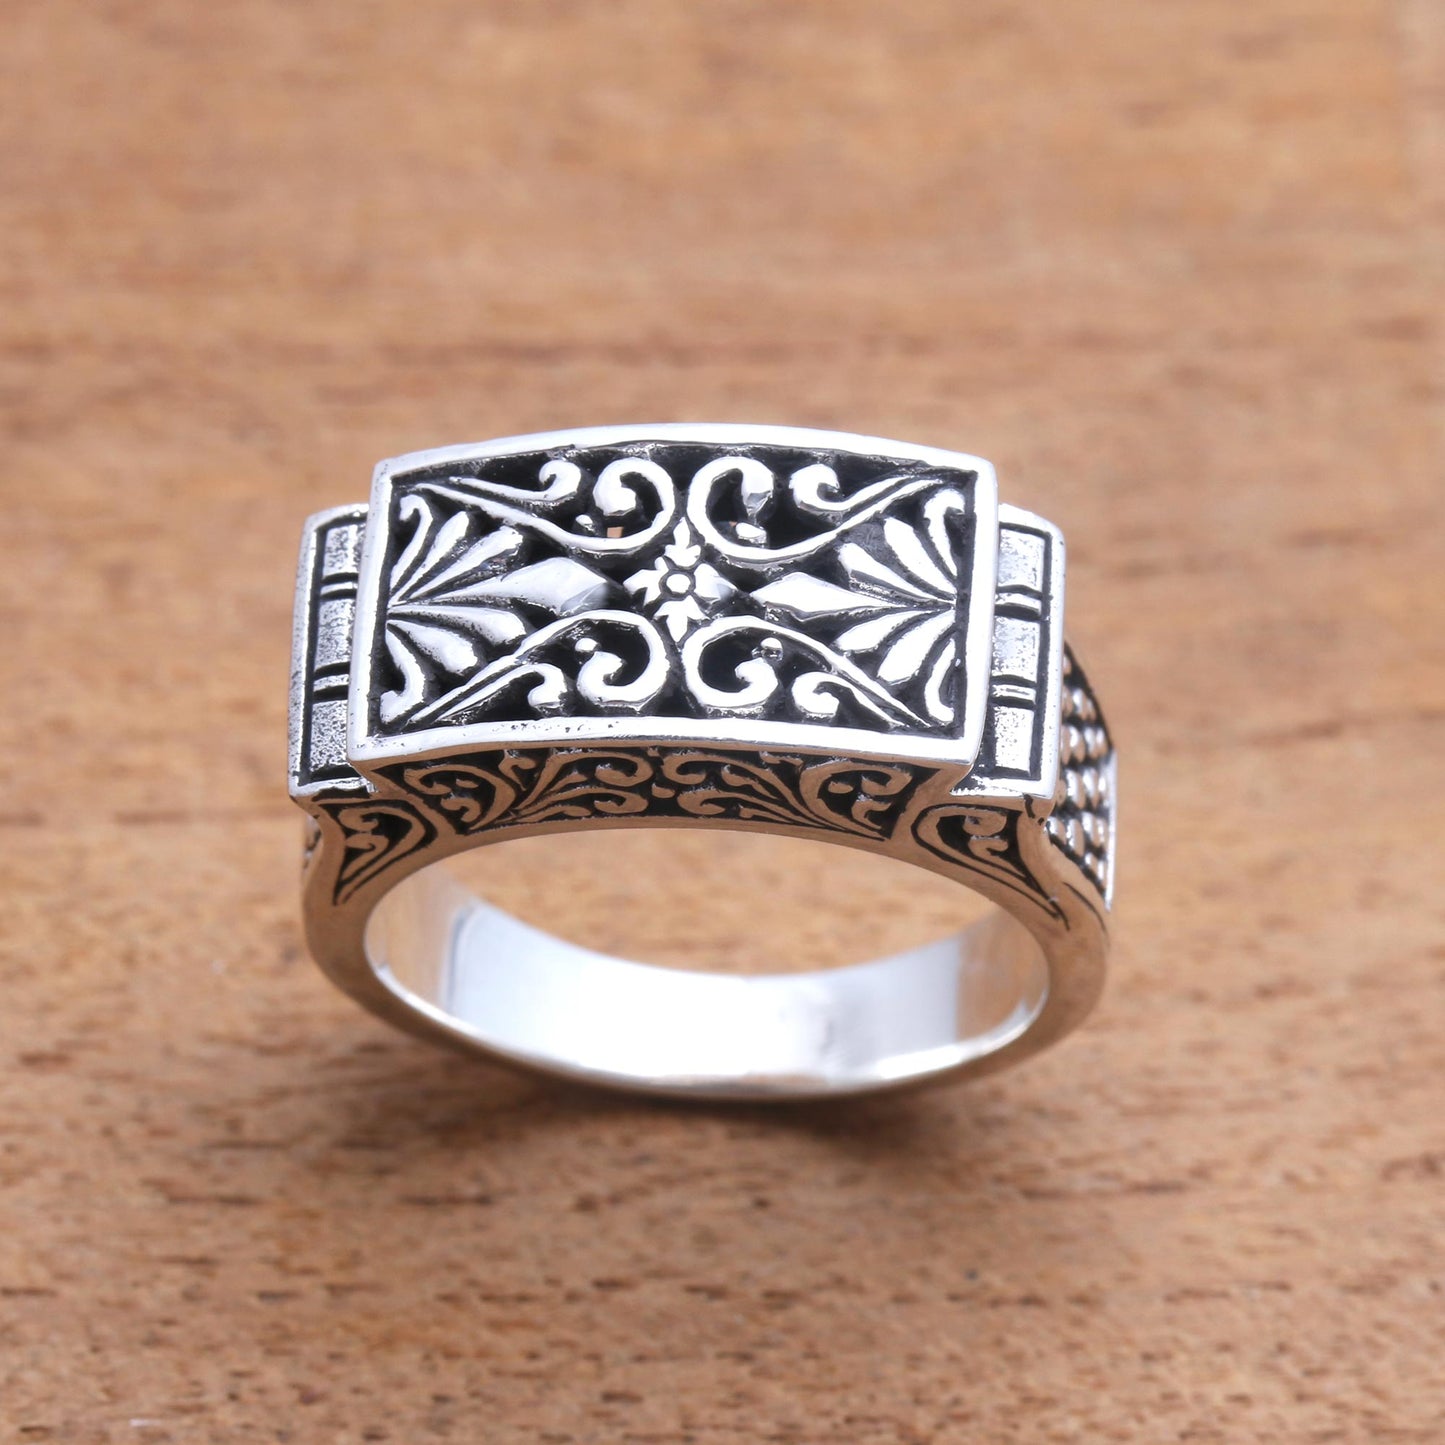 Extraordinary Vines Vine Pattern Sterling Silver Signet Ring Crafted in Bali